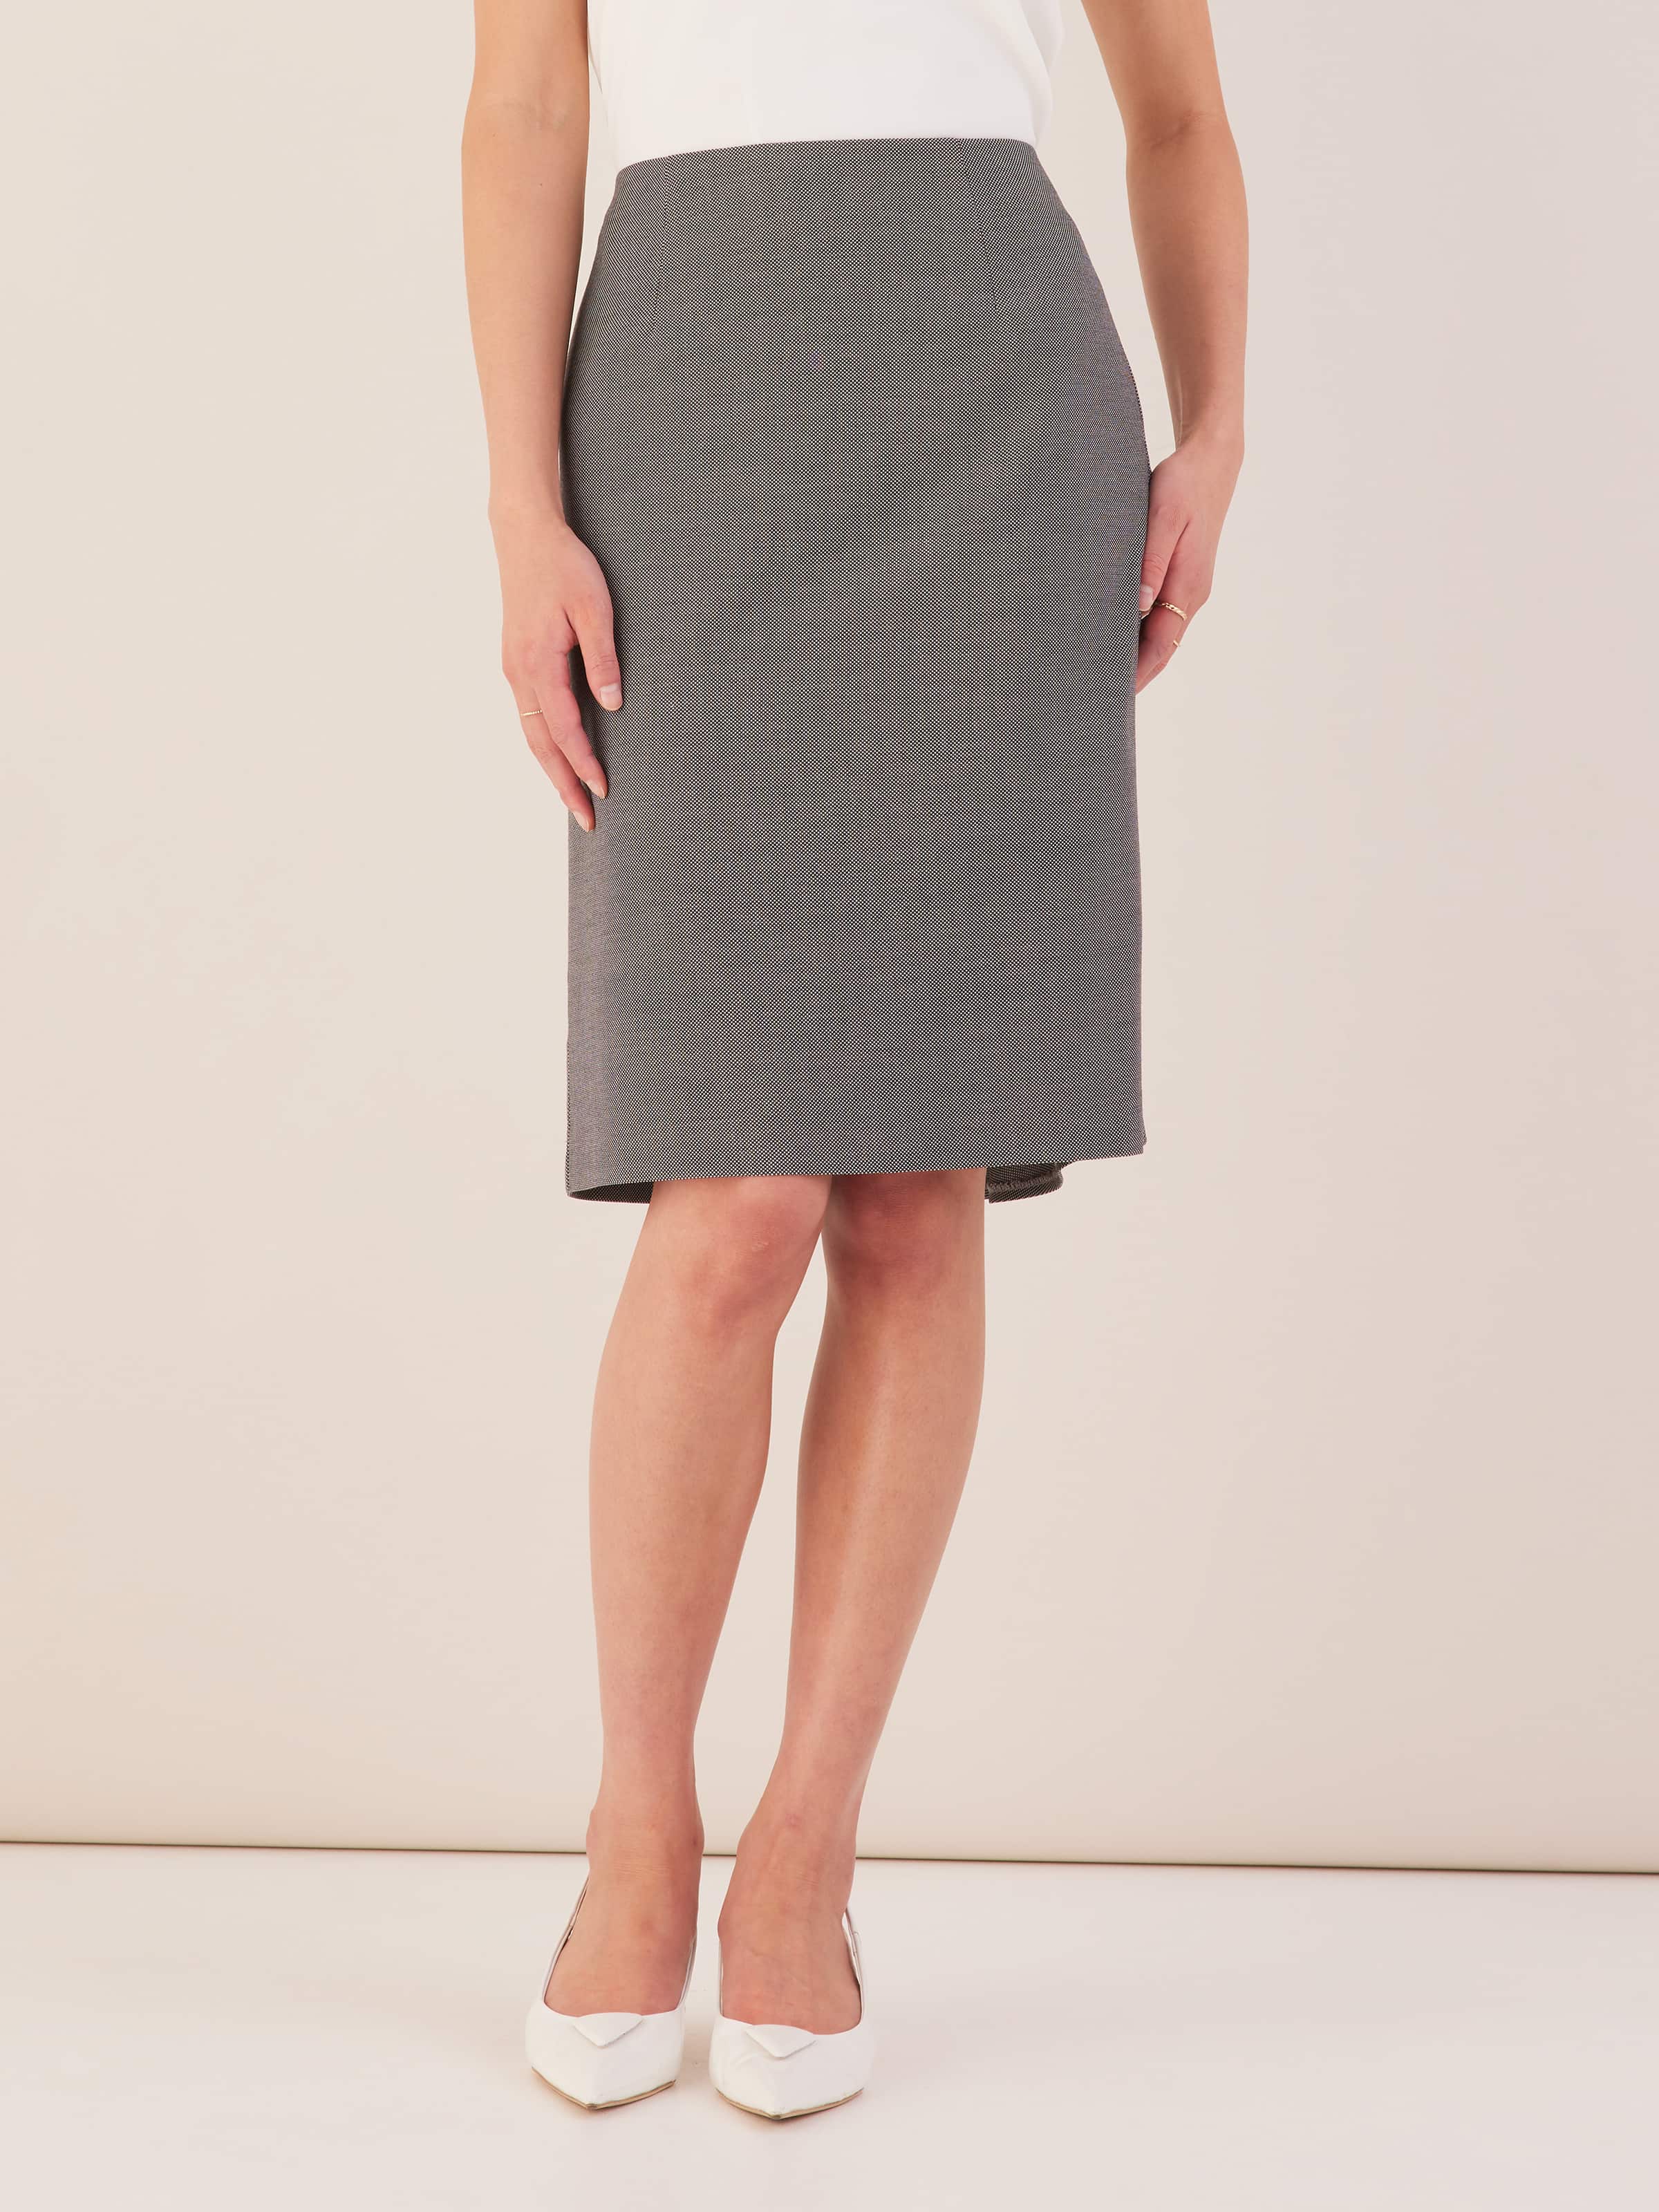 Women corporate skirts Archives - Sojoee